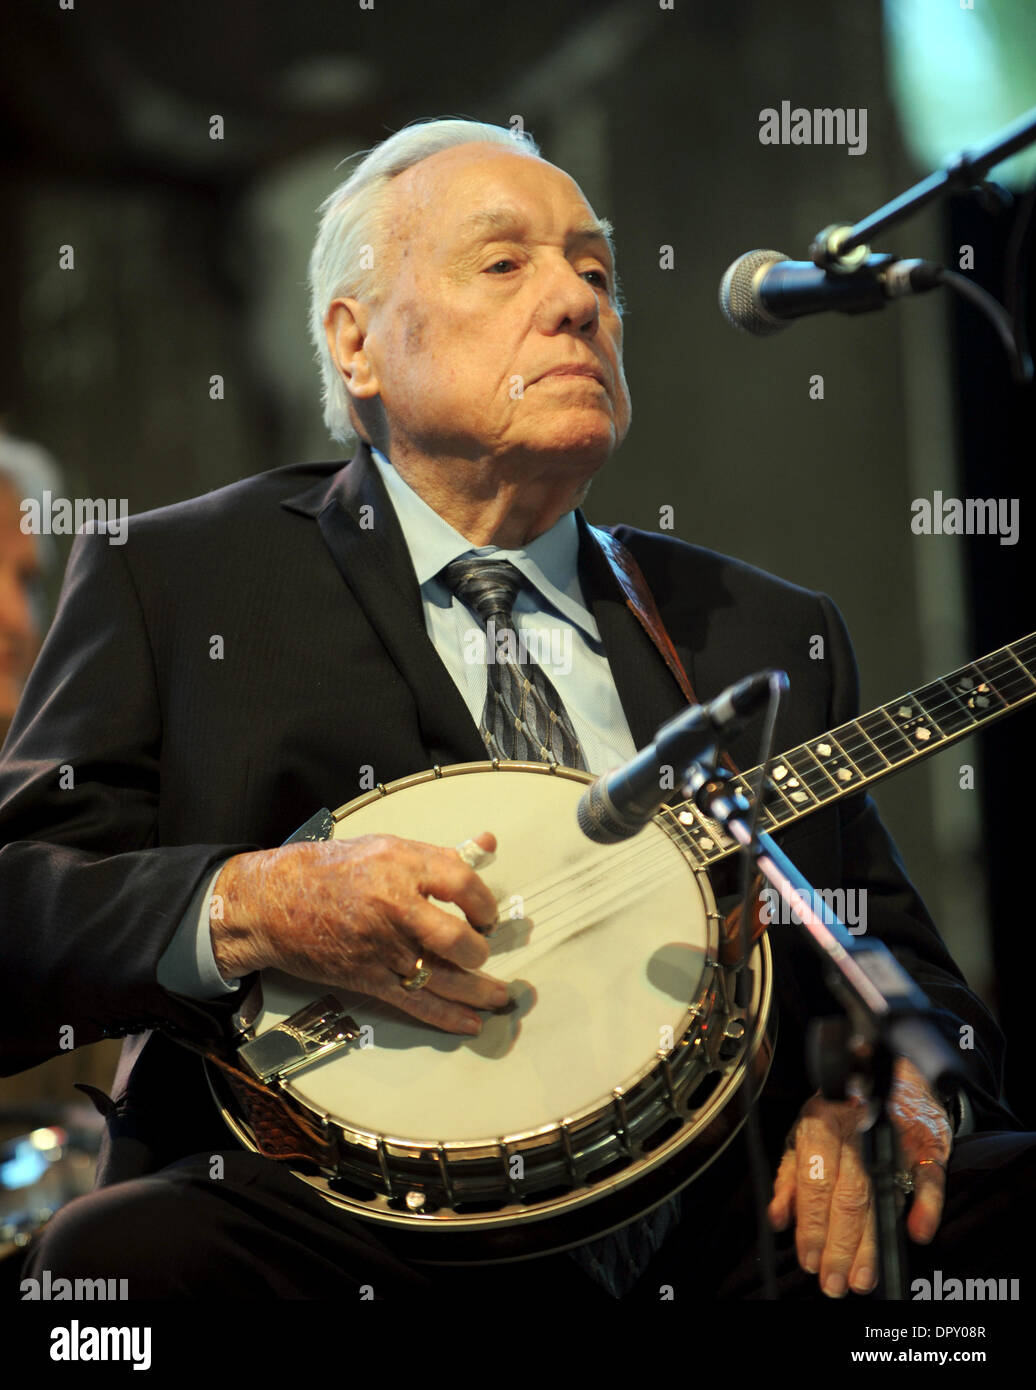 Apr 25, 2009 - Indio, California, USA - Legendary Banjoist EARL SCRUGGS performs live at the Empire Polo Field as part of the 2009 Stagecoach Country Music Festival. (Credit Image: © Jason Moore/ZUMA Press) Stock Photo